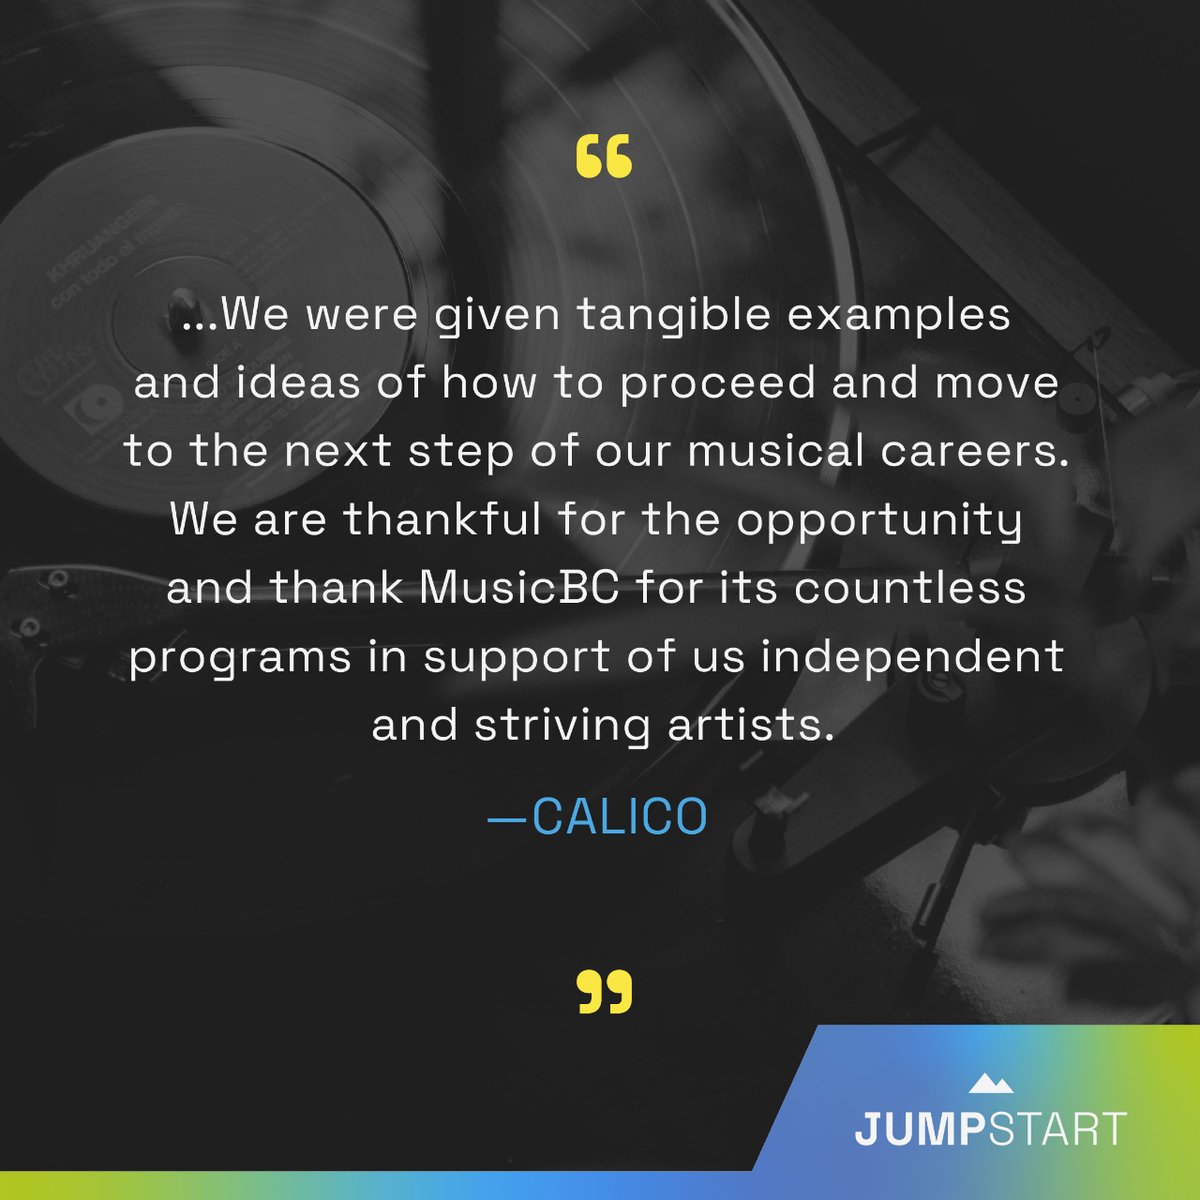 Looking to jumpstart the next step in your music career? Take advantage of free one-on-one sessions with music industry professionals through our Jumpstart Consultation program! Request a call 📞 today ➡️ bit.ly/3W2yj9L